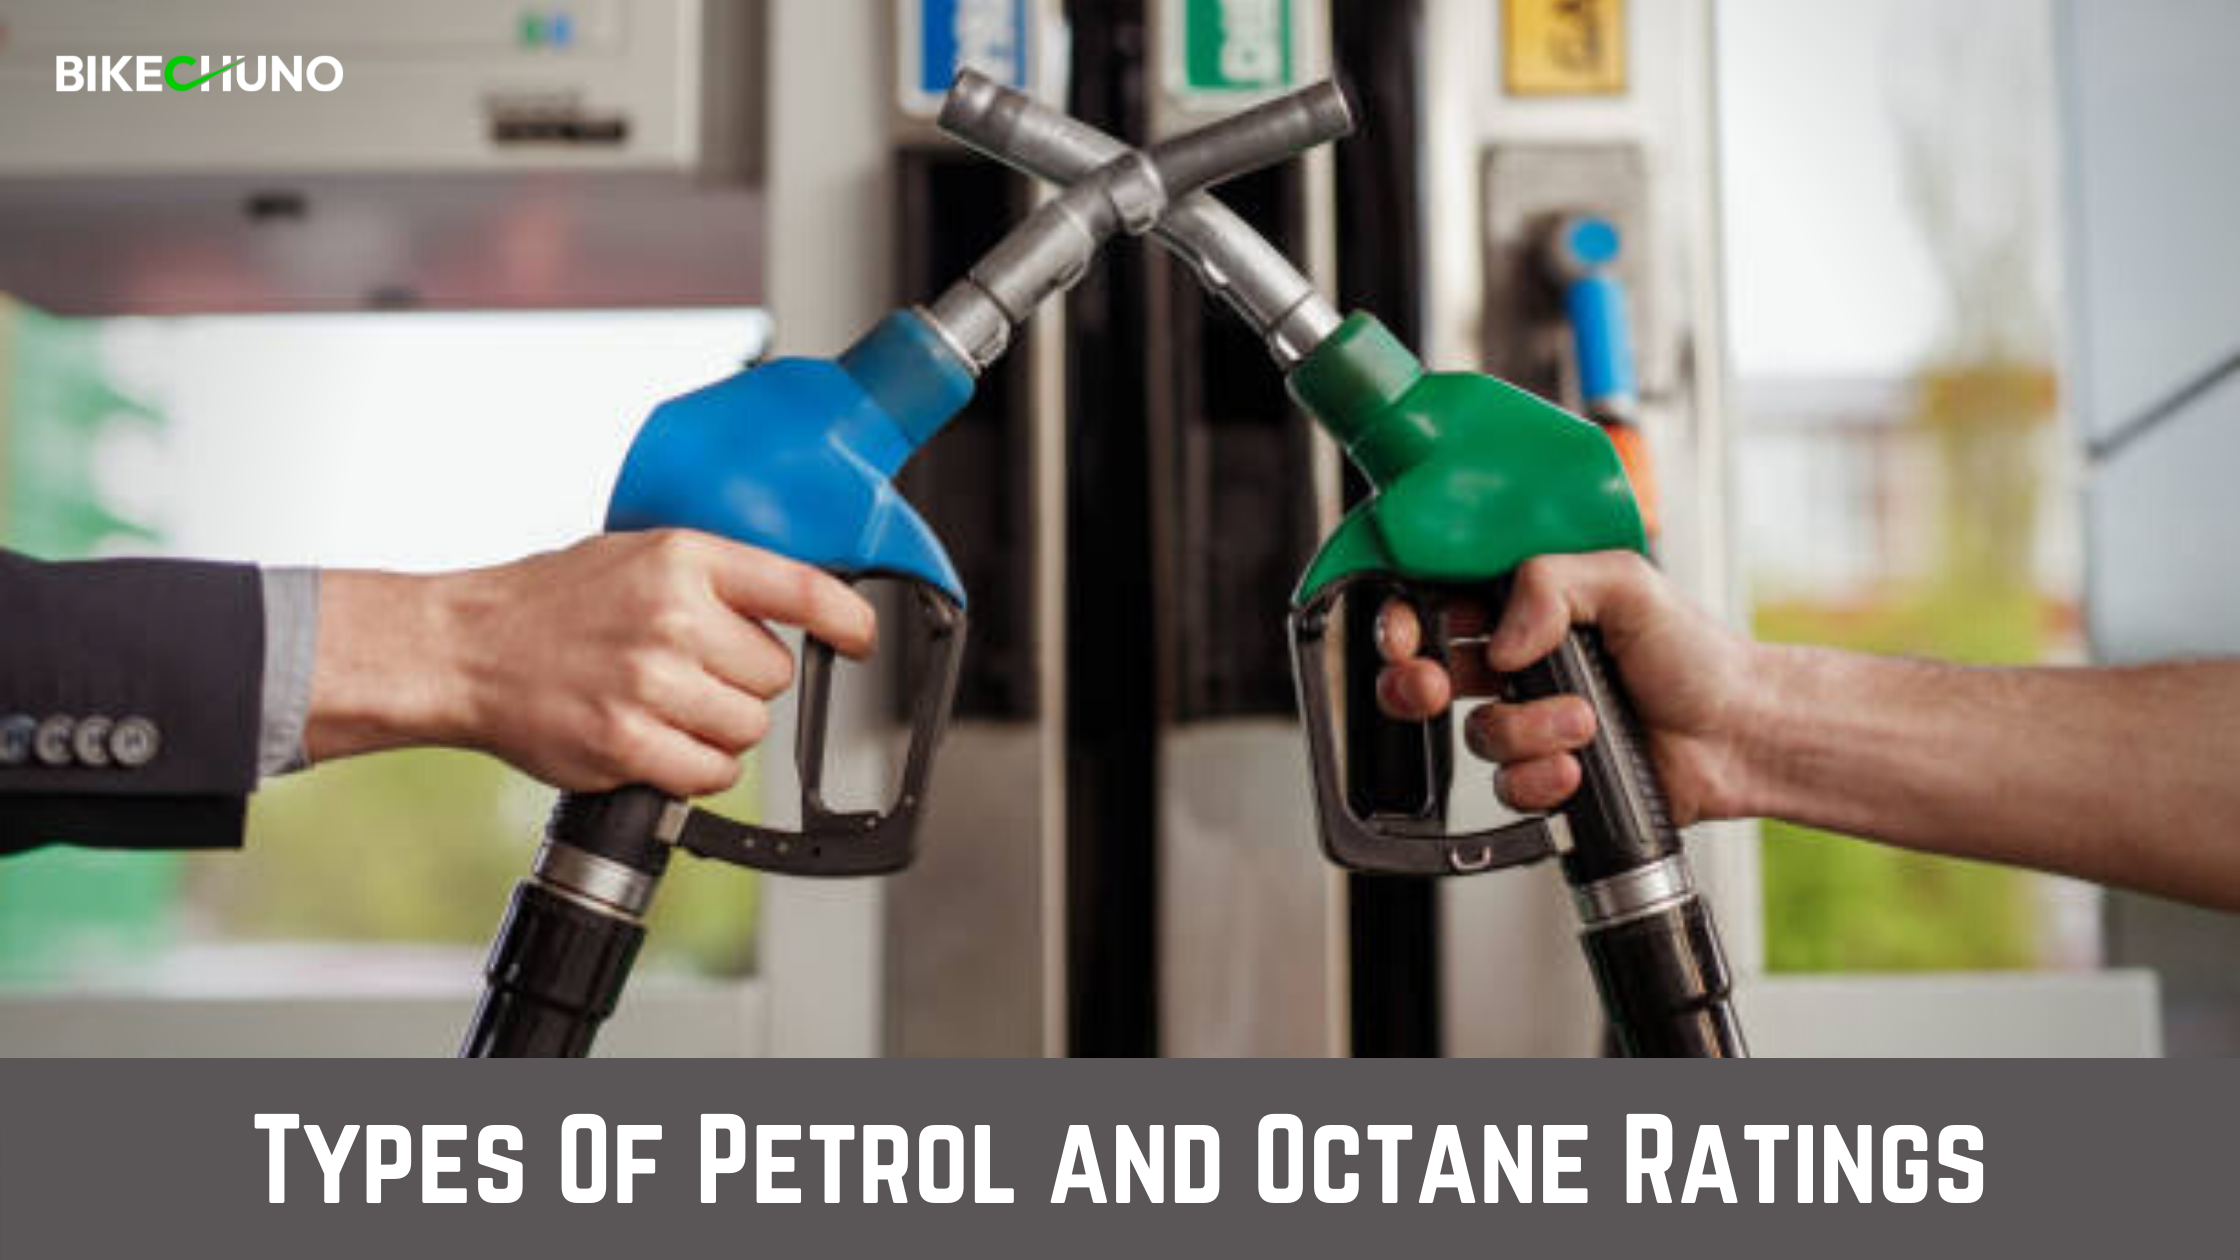 Types Of Petrol and Octane Ratings